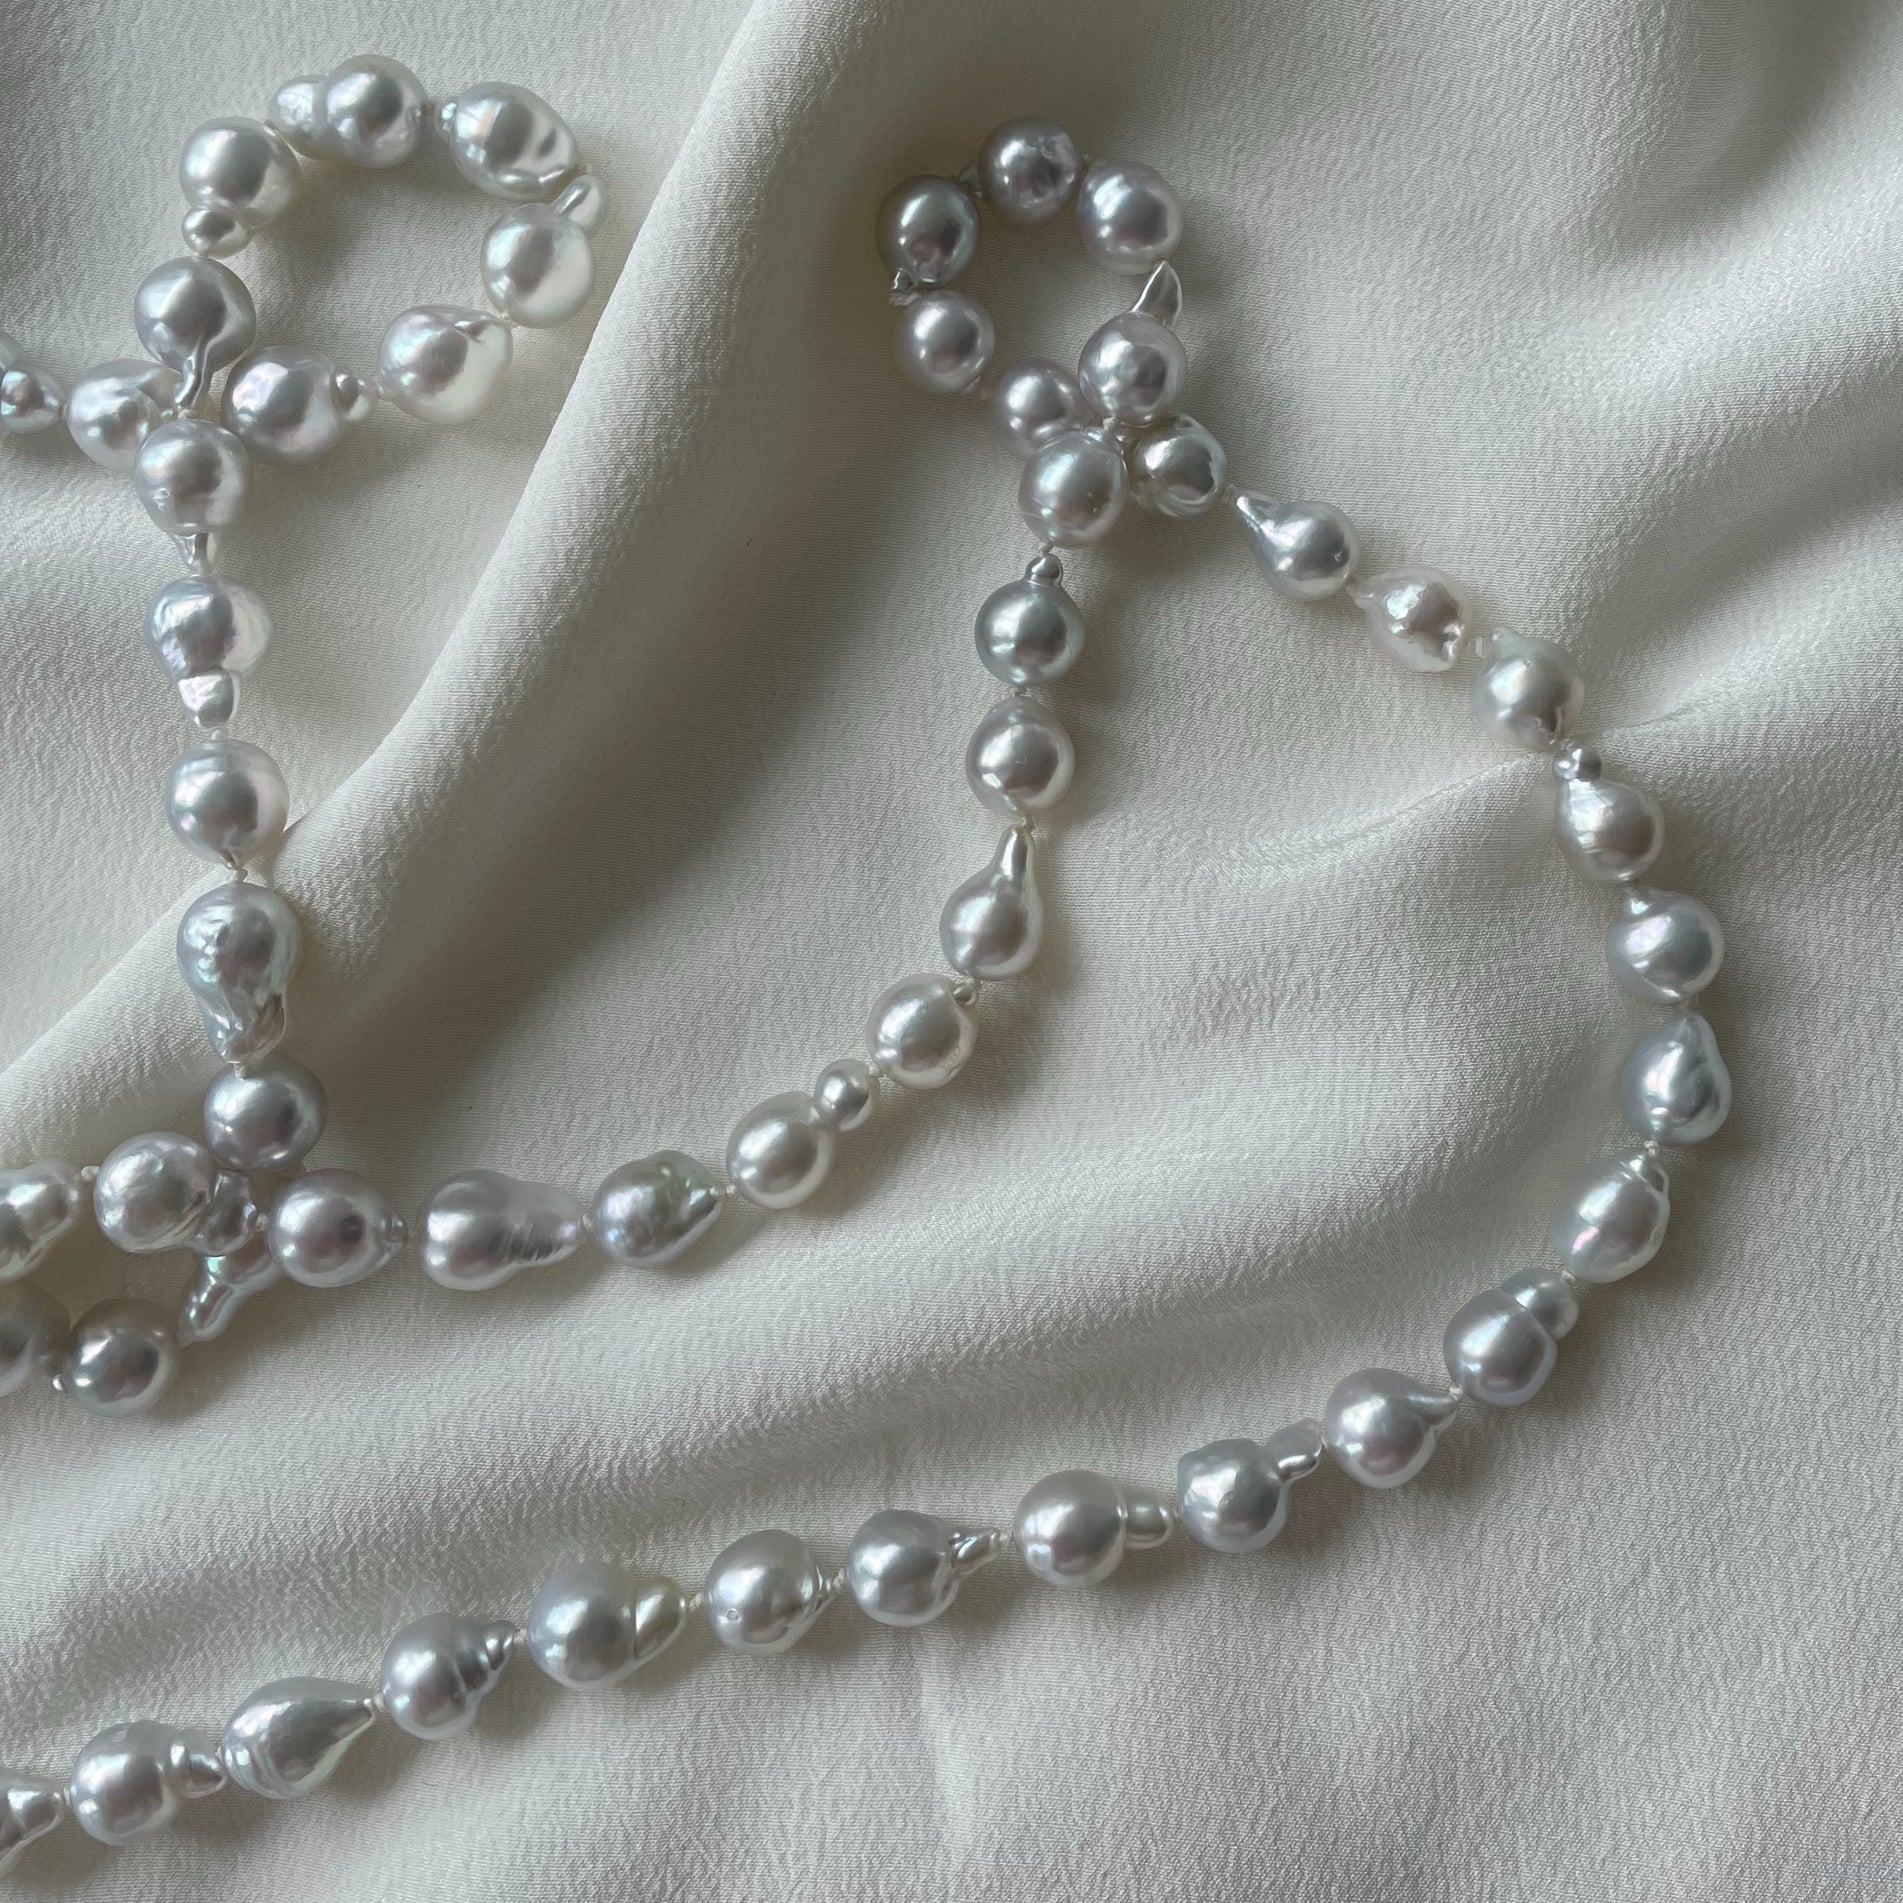 Pearl necklace by Hulchi Belluni taken on silk fabric used as an image for a jewellery repair page